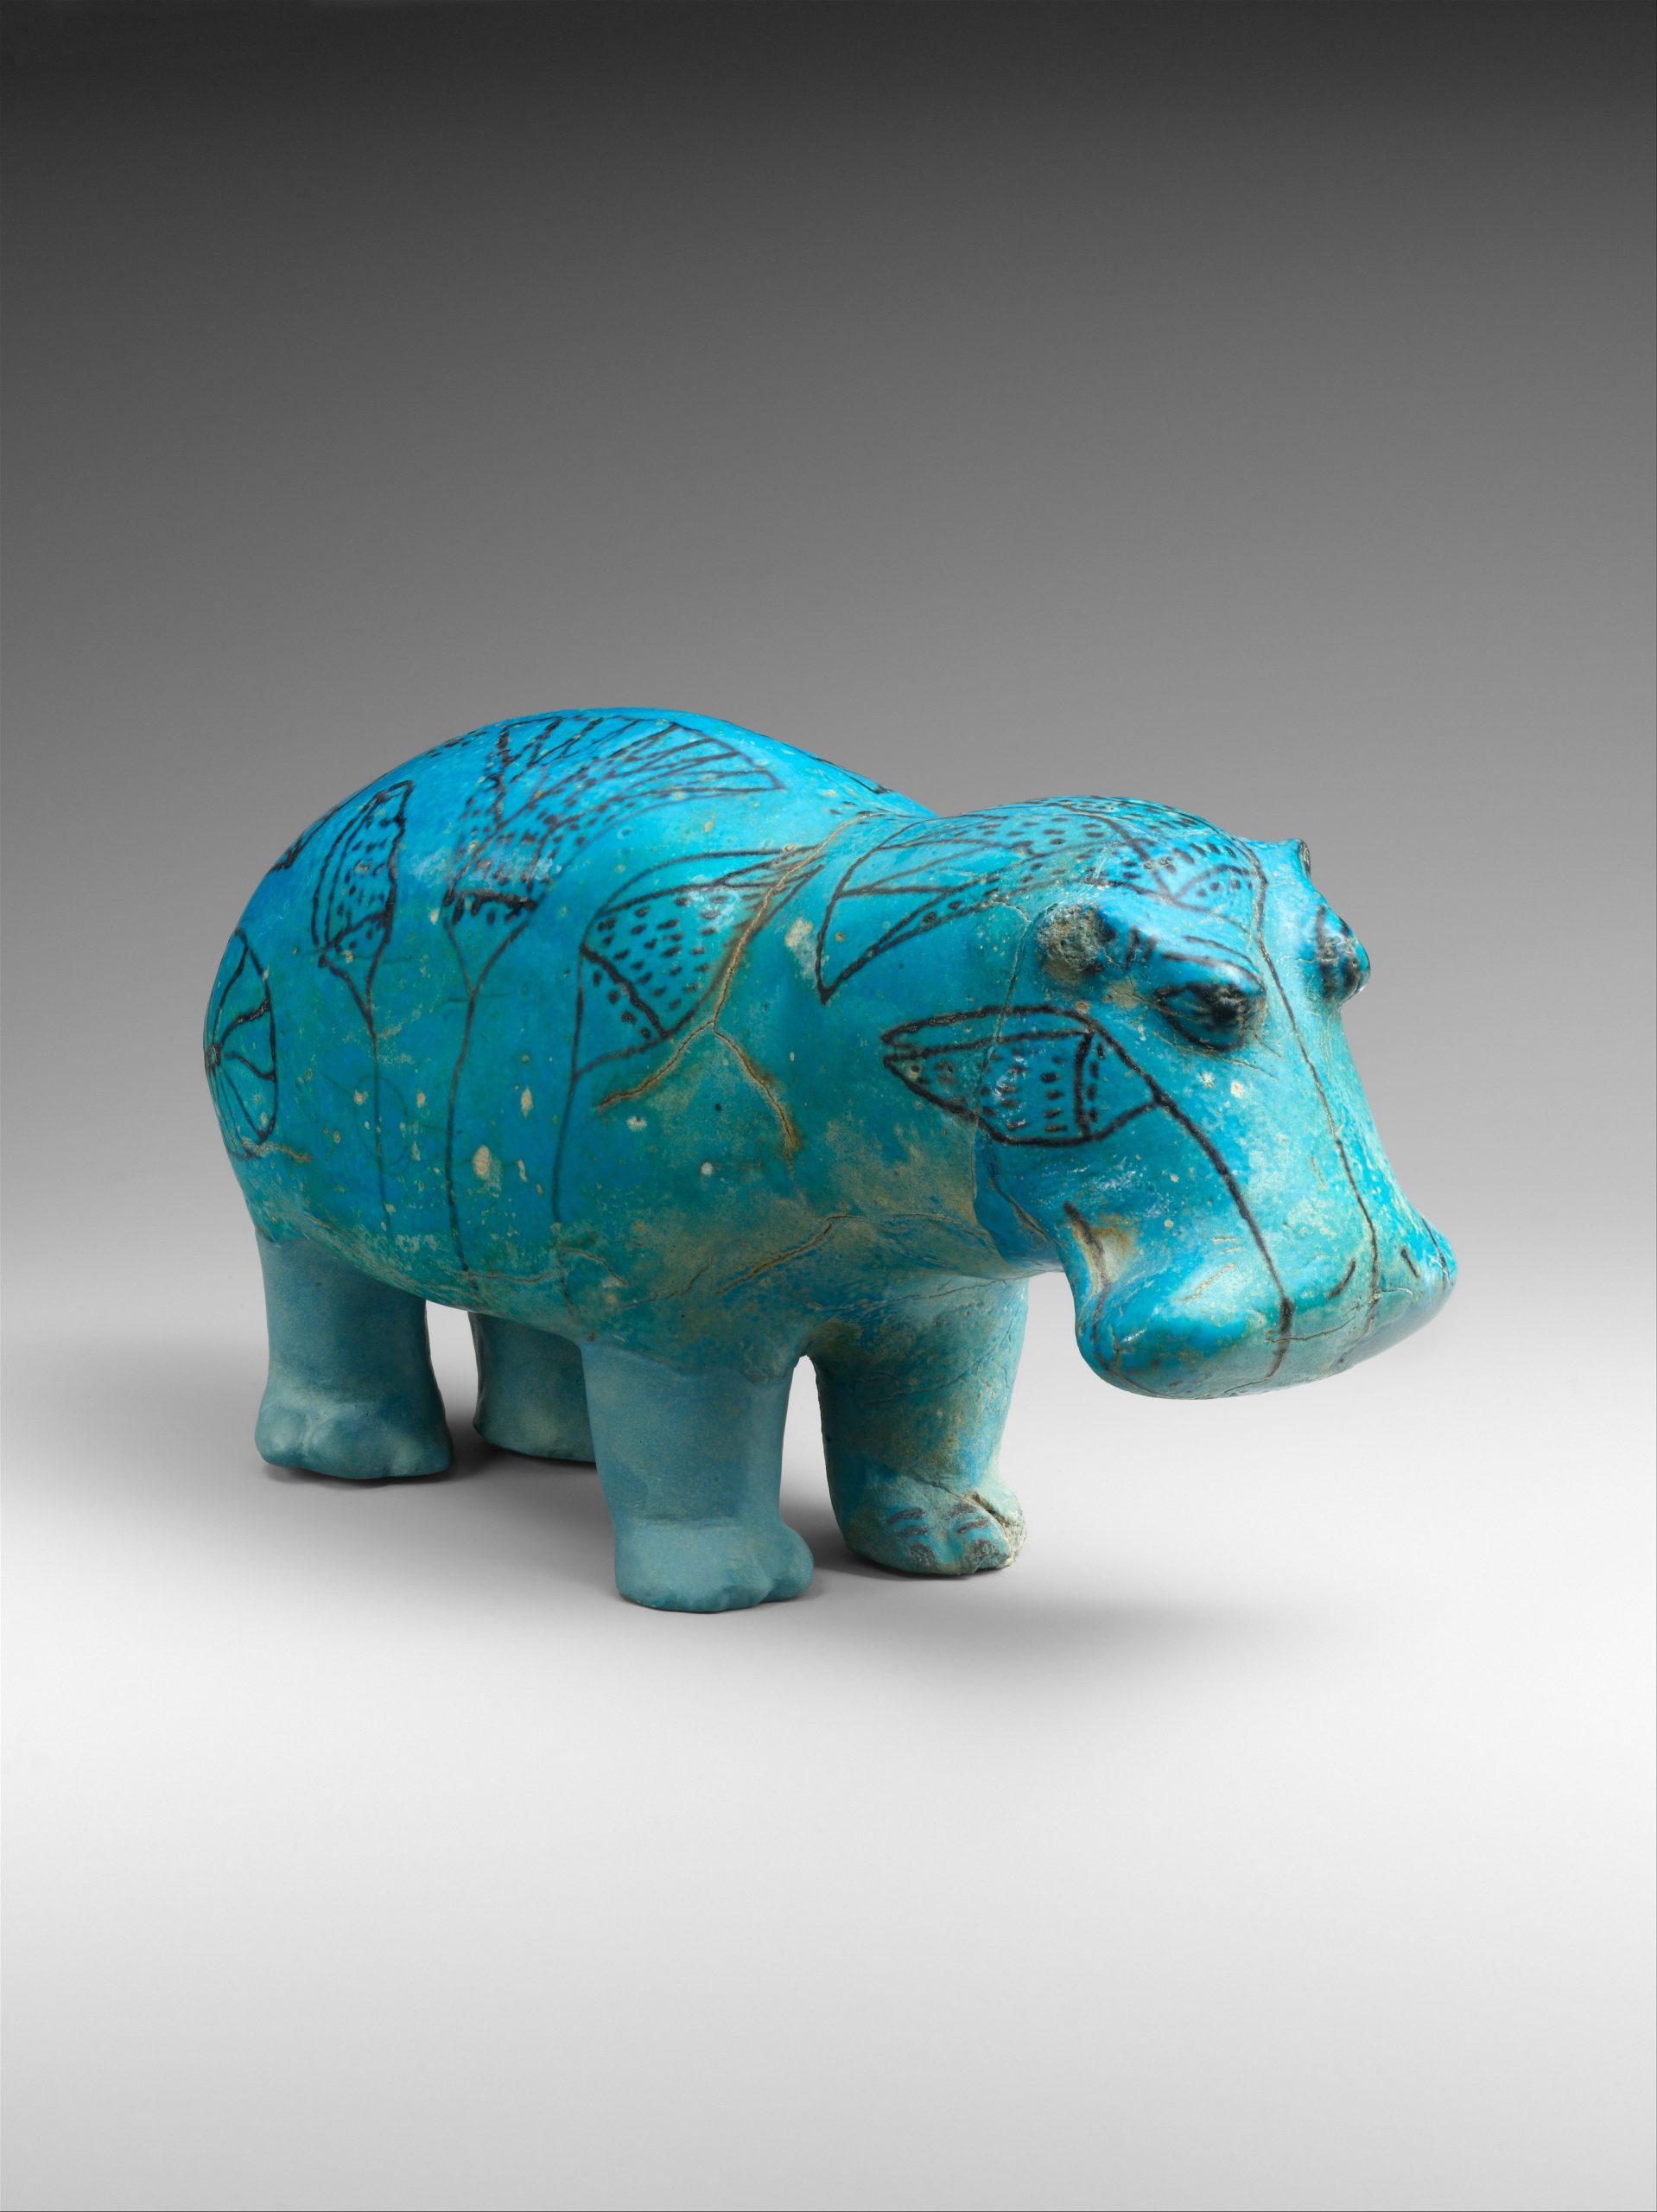 A turquoise marble stone hippo statue.